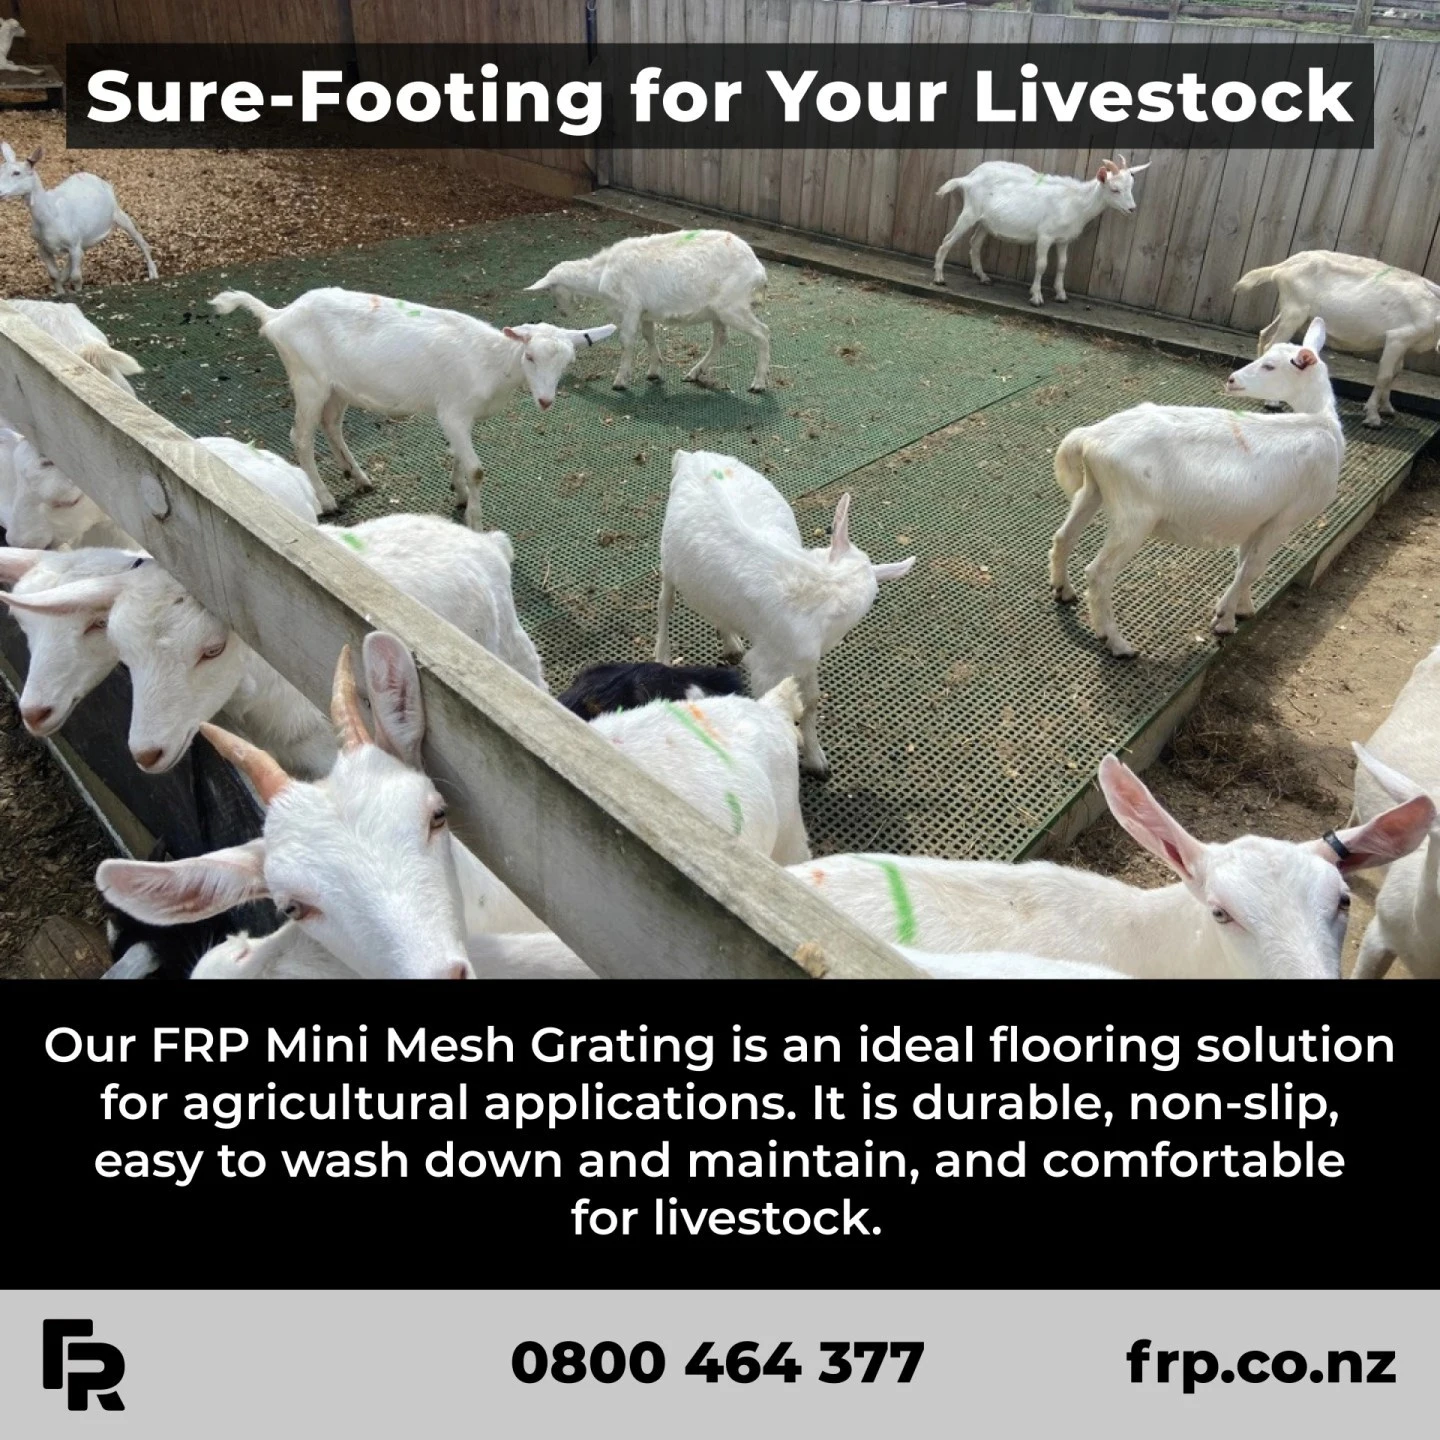 Enquire today!

#frp #frpproducts #agriculture #farming #nzfarms #livestock #goats #nzfarming